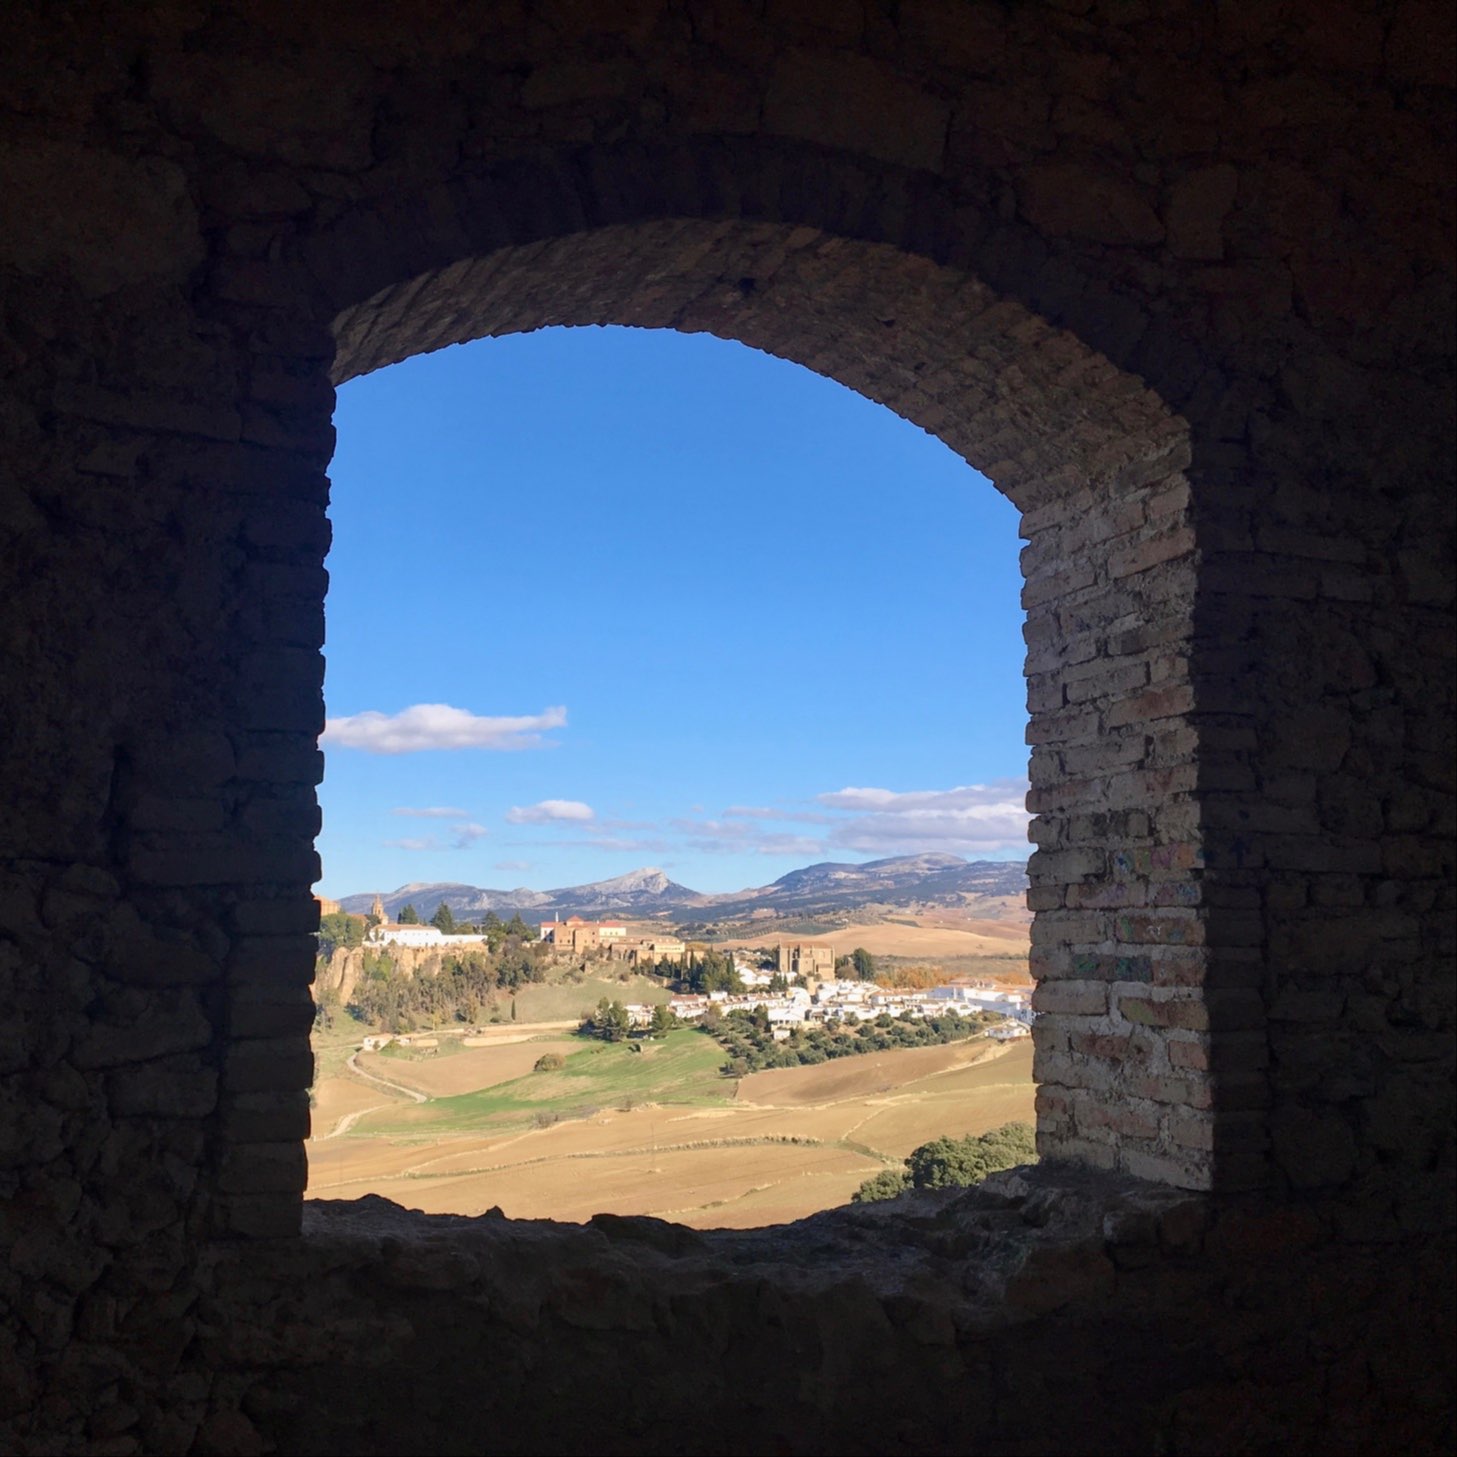 Ronda on a sunny day through the window of an abandoned building with Sierra Nevada mountains, Spain